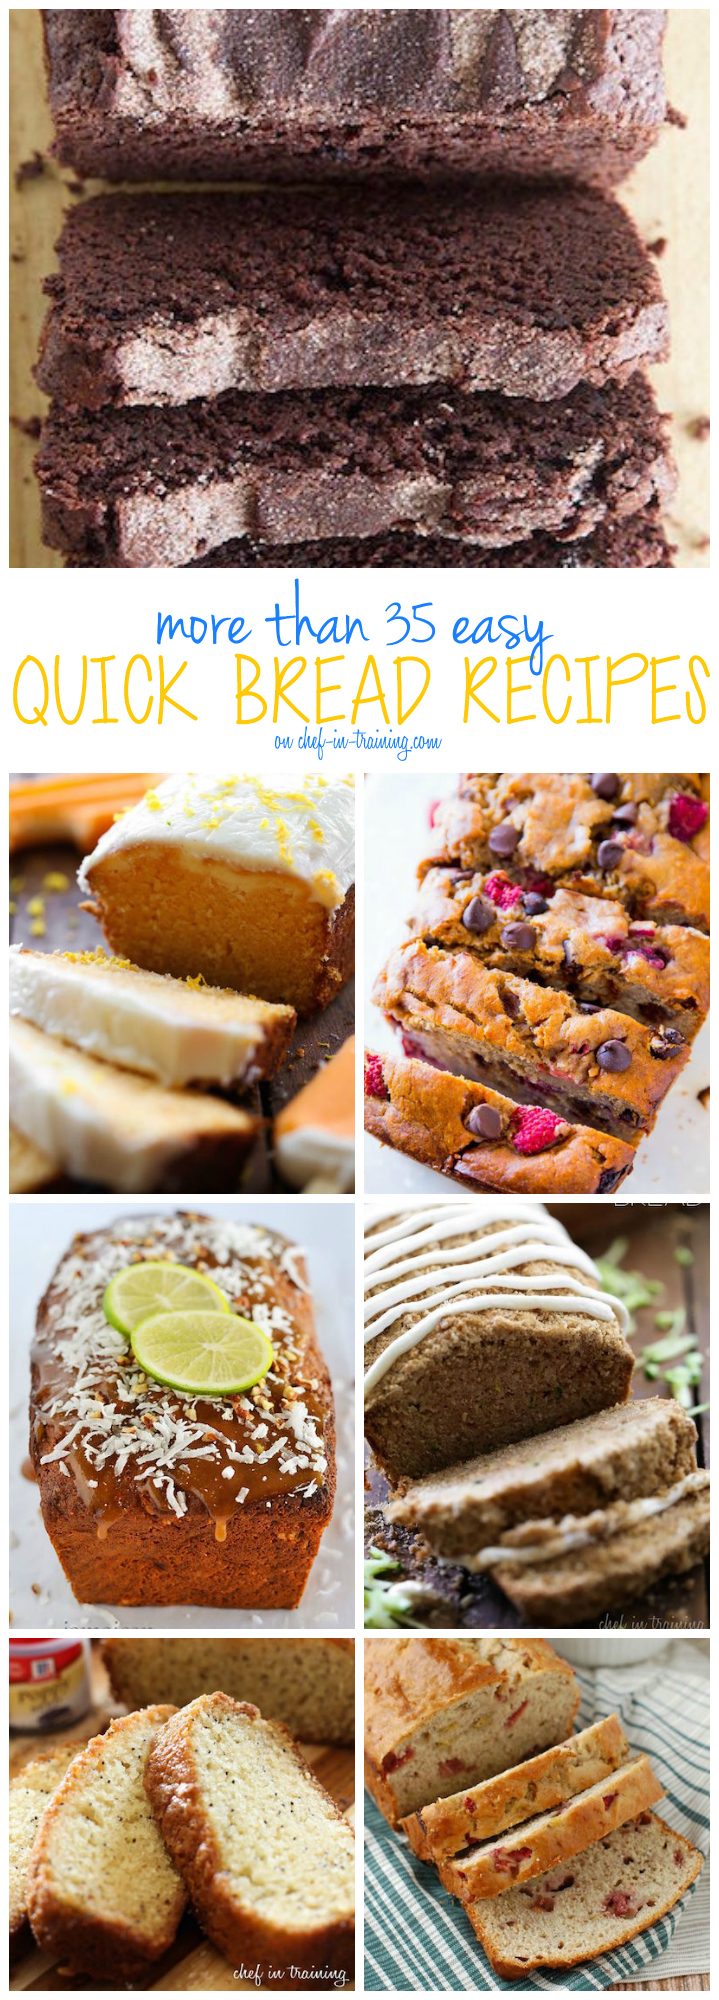 More than 35 Easy Quick Bread Recipes.... This list is one of the best round ups out there! You will want to make these bread recipes over and over again!